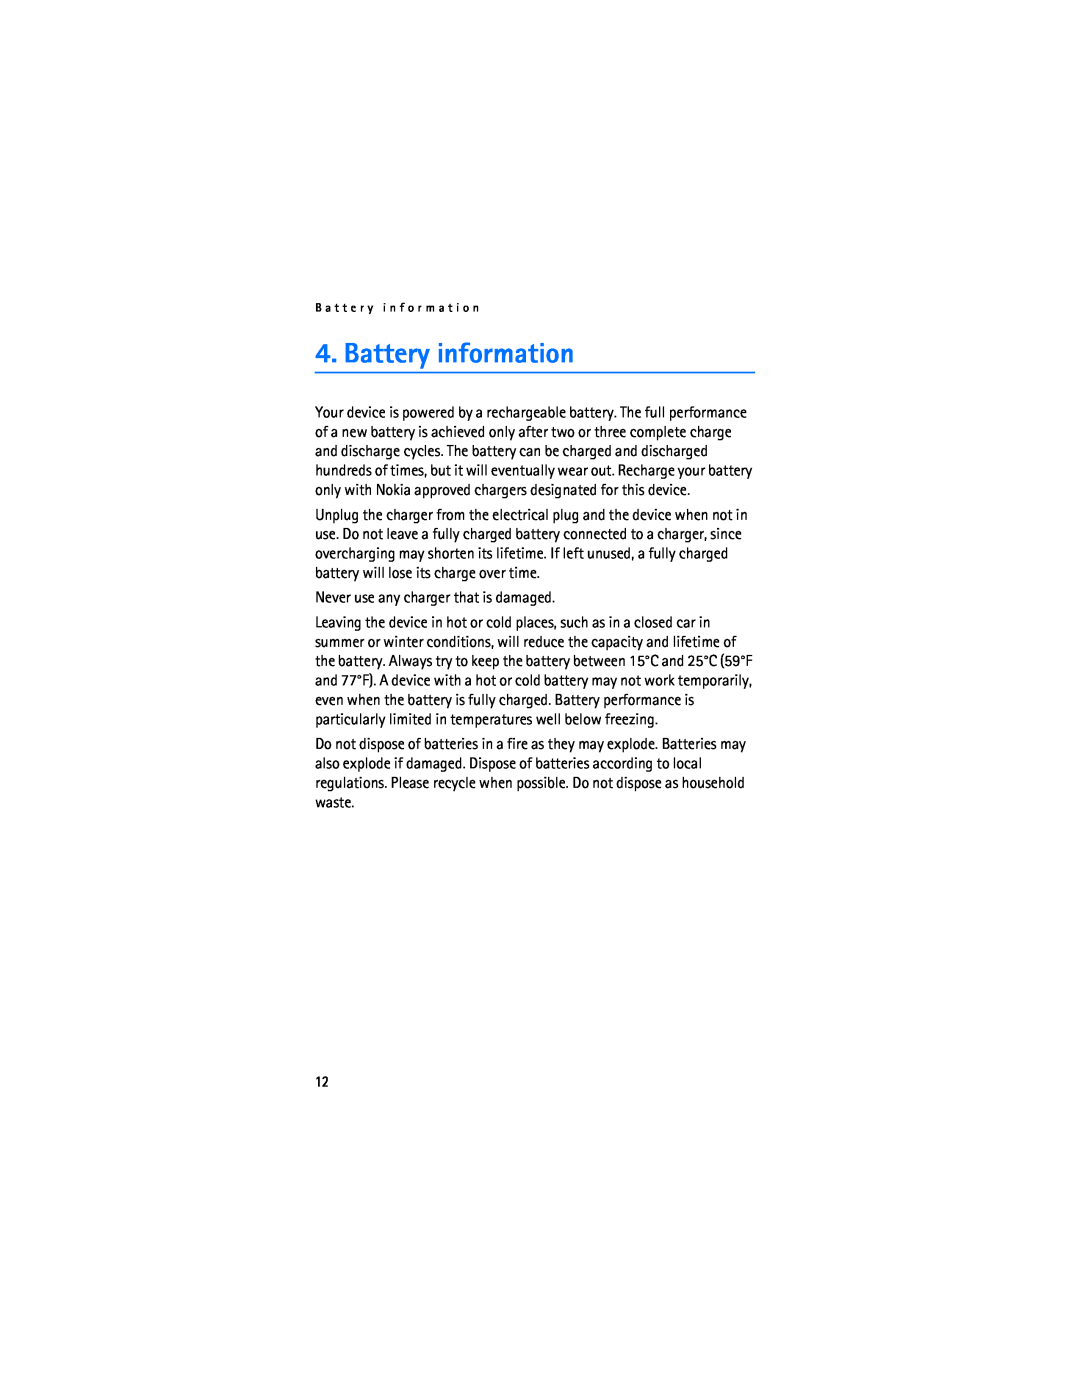 Nokia BH-700 manual Battery information, Never use any charger that is damaged 